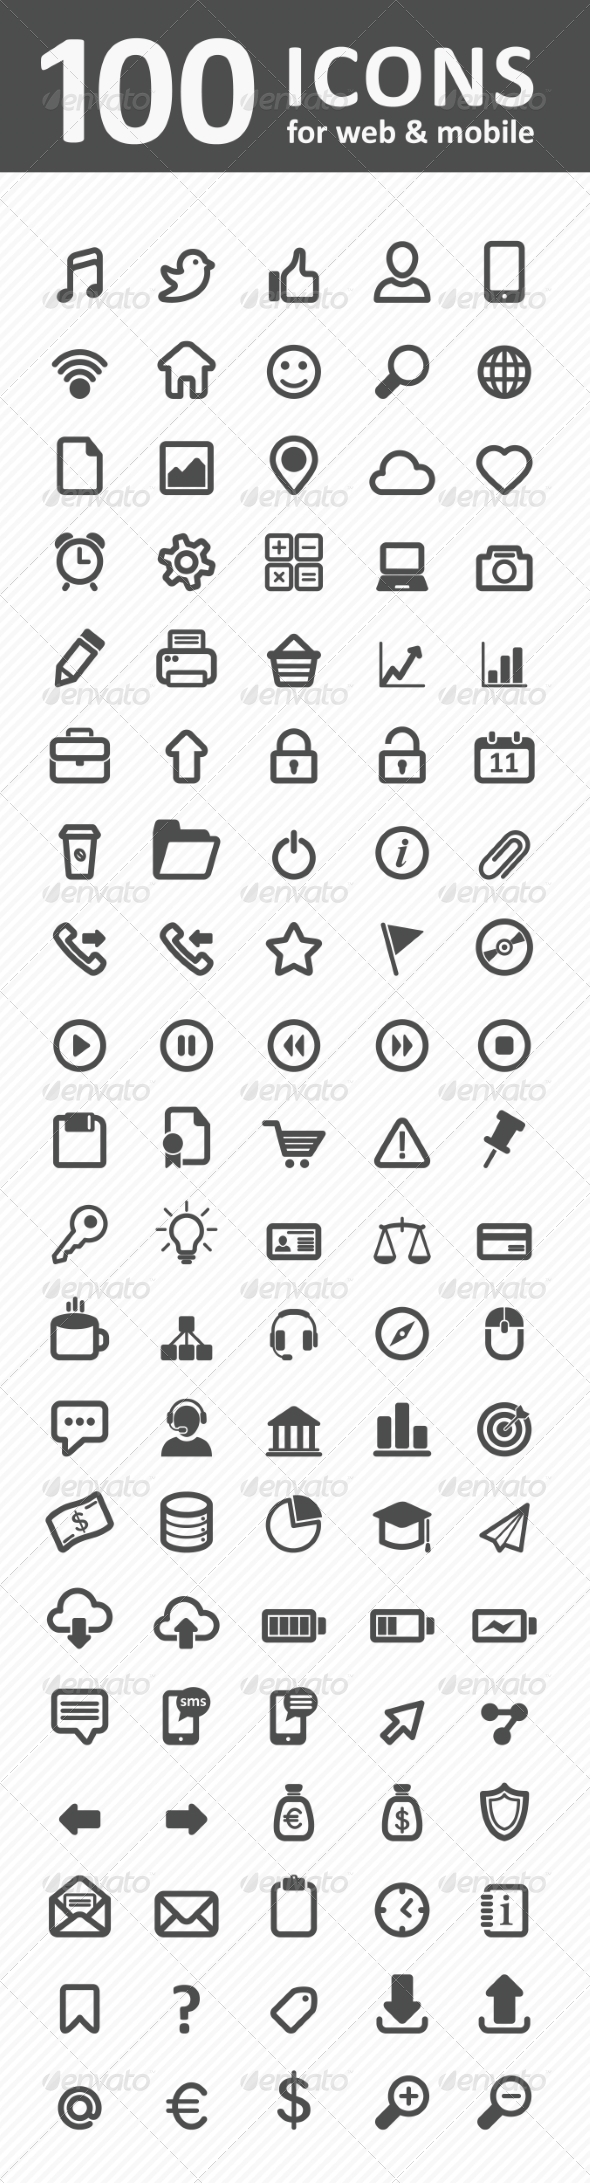 100 Icons for Web and Mobile